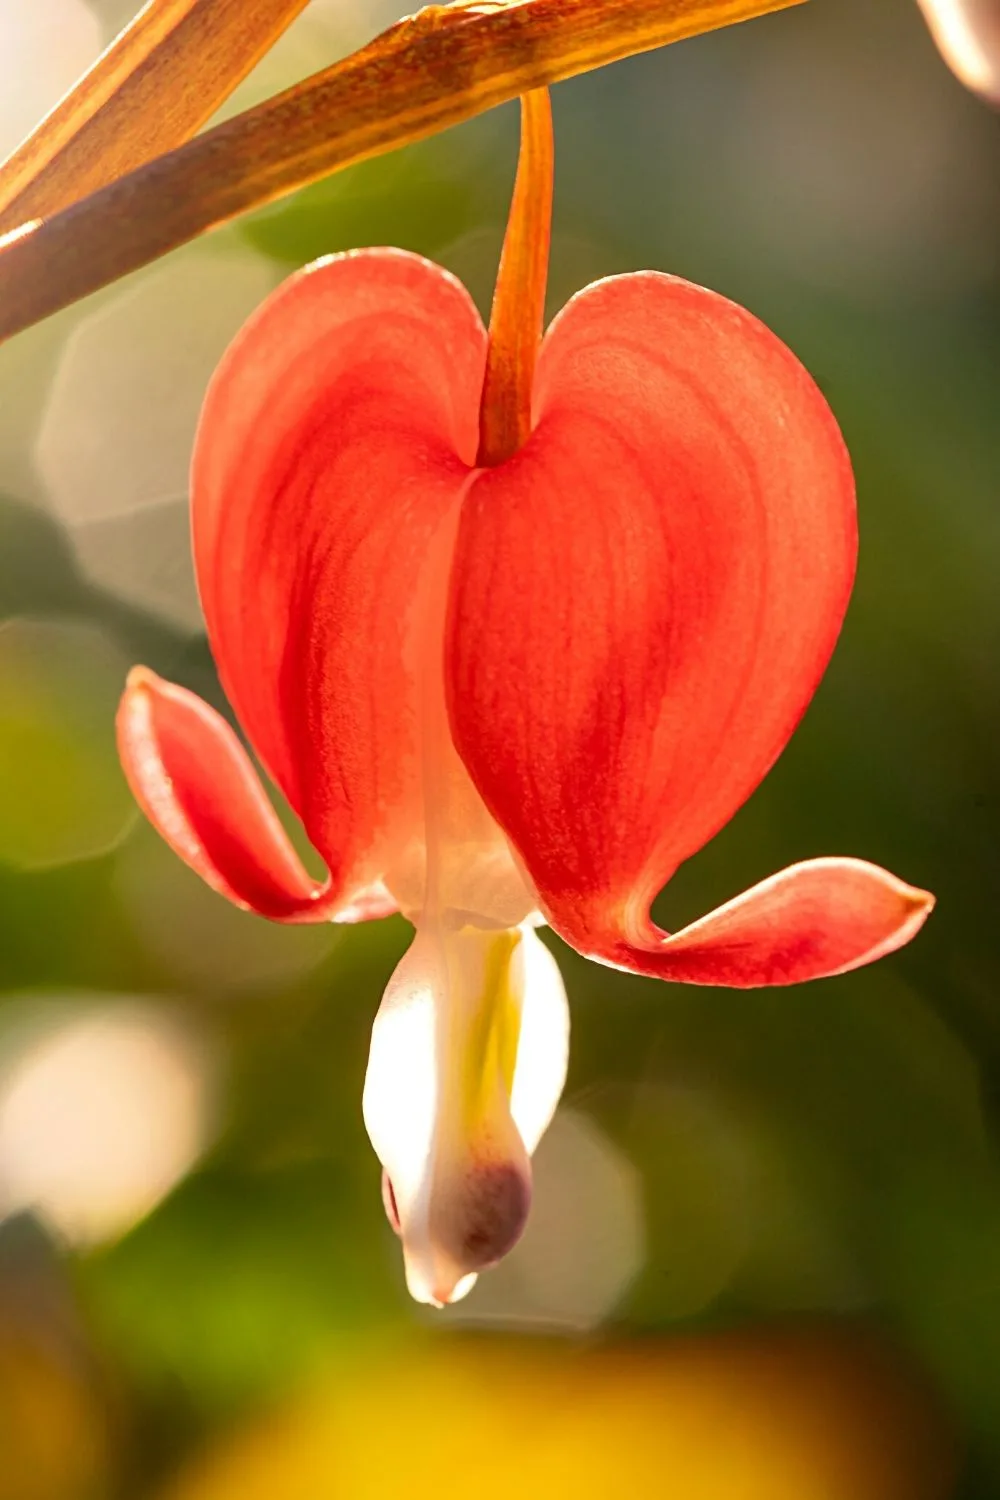 Bleeding Heart is a beautiful plant to place in your north-facing balcony